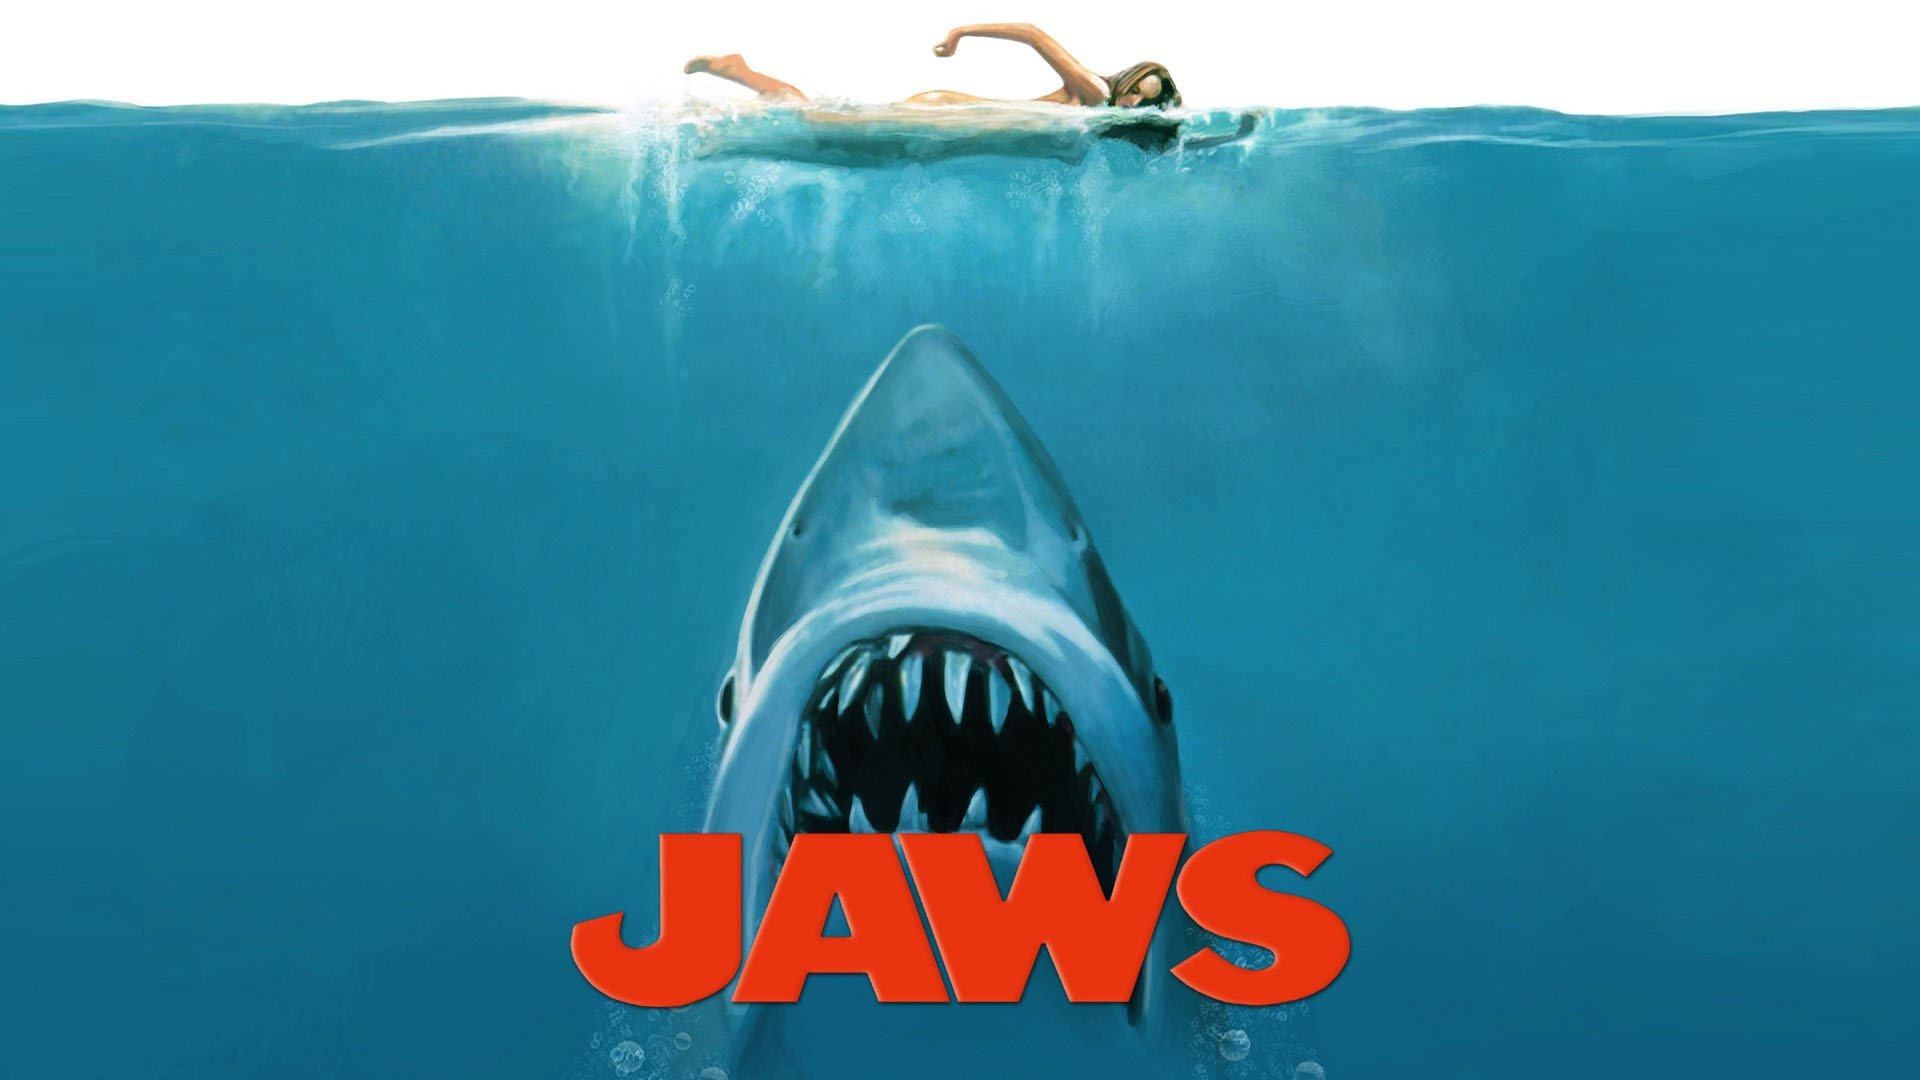 JAWS (1975) Live Watch-Along - YouTube